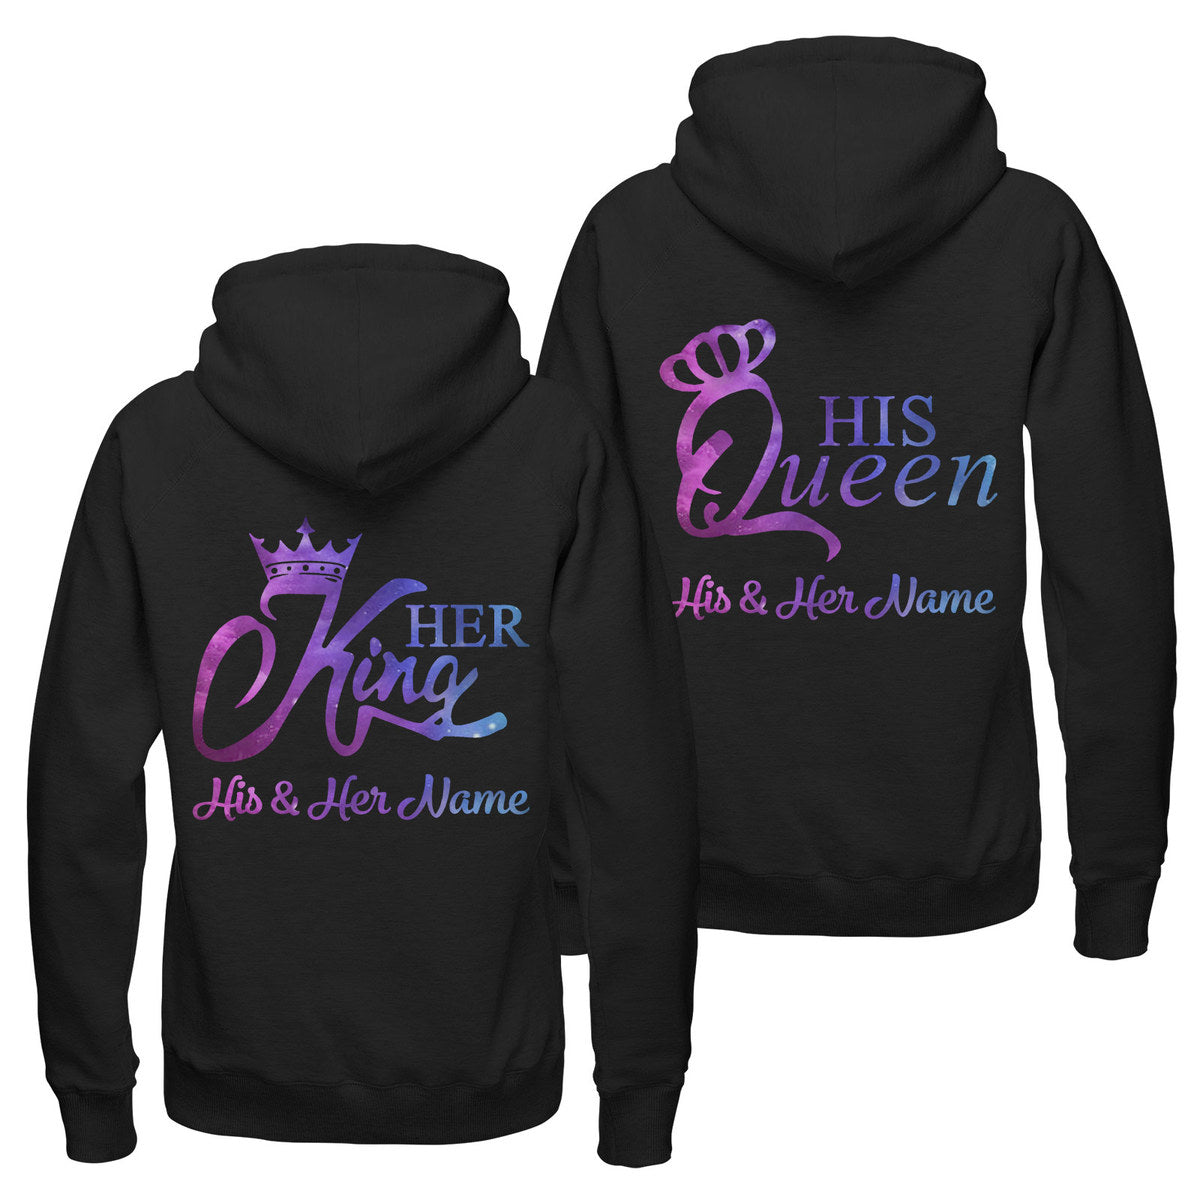 Personalized Her King And His Queen Hoodie, King And Queen Couple Hoodies, His And Hers Sweatshirts, Matching Couple Hoodies, Valentine’S Day Couple